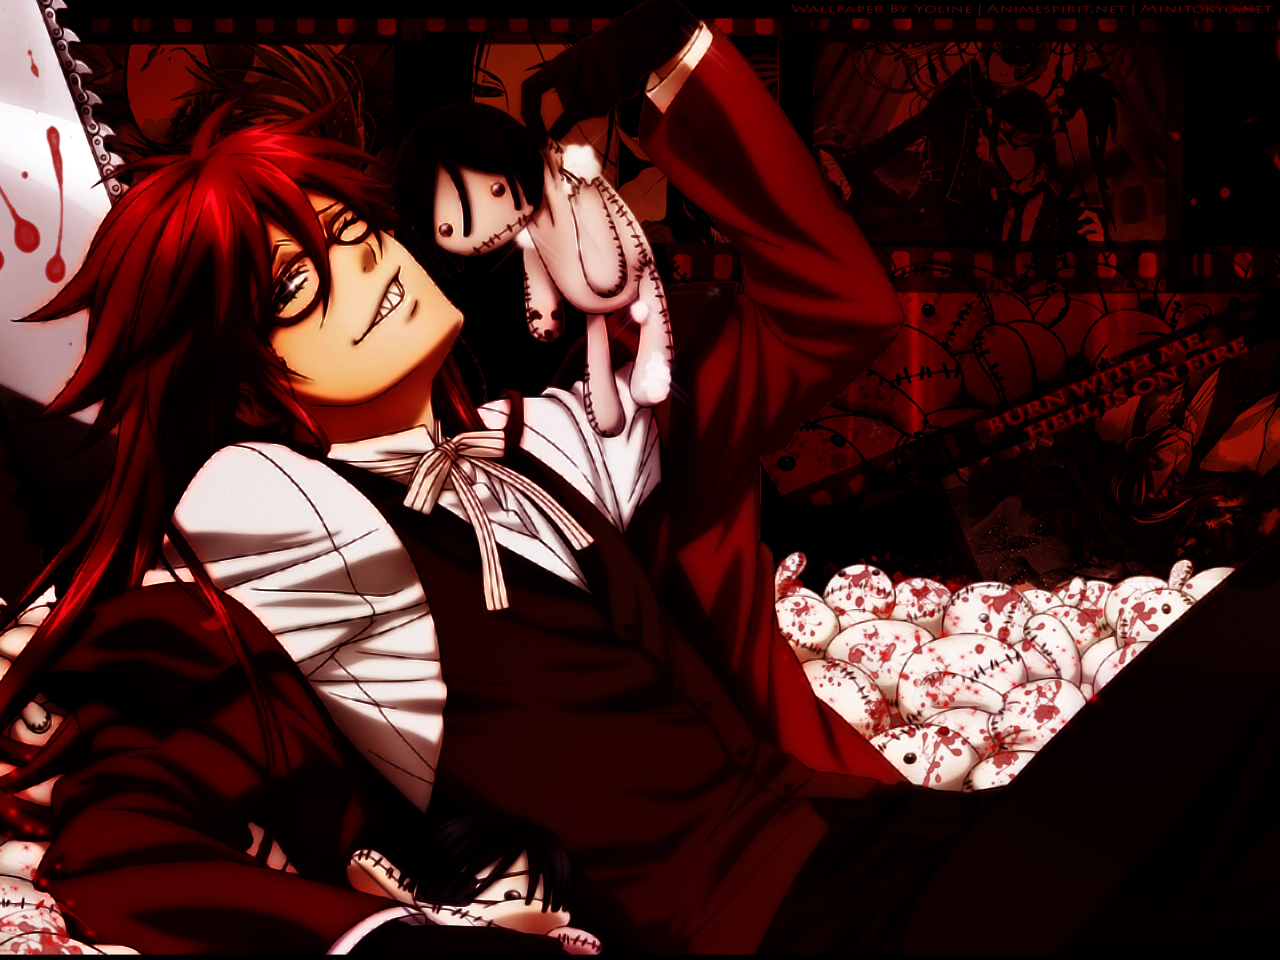 Black Butler images Grell HD wallpaper and background photos 23826708 1280x960